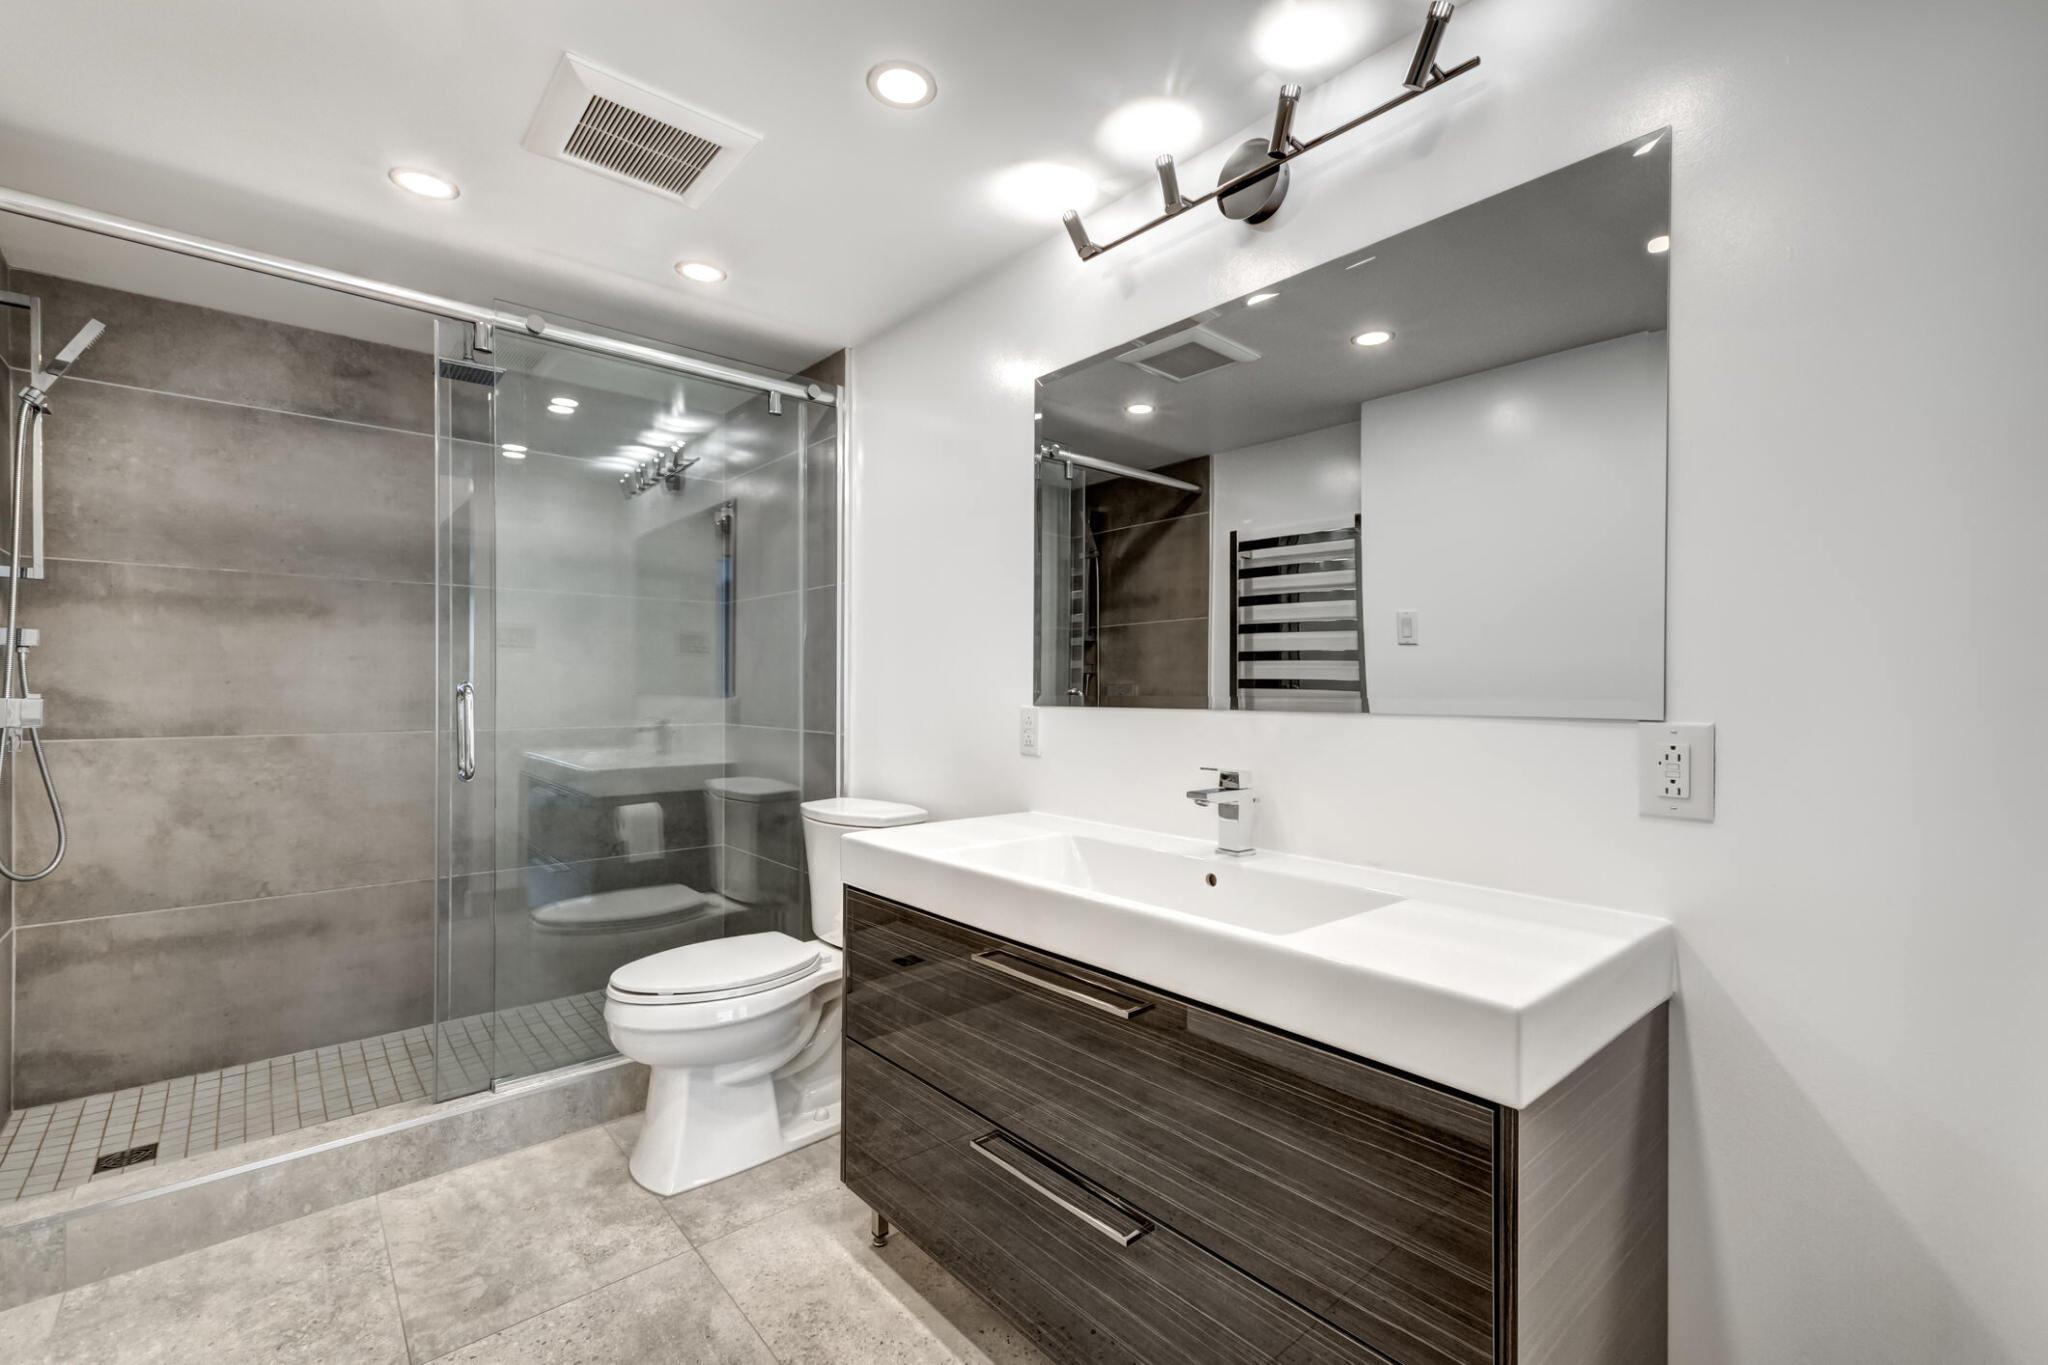 Key Considerations for a Successful Bathroom Makeover